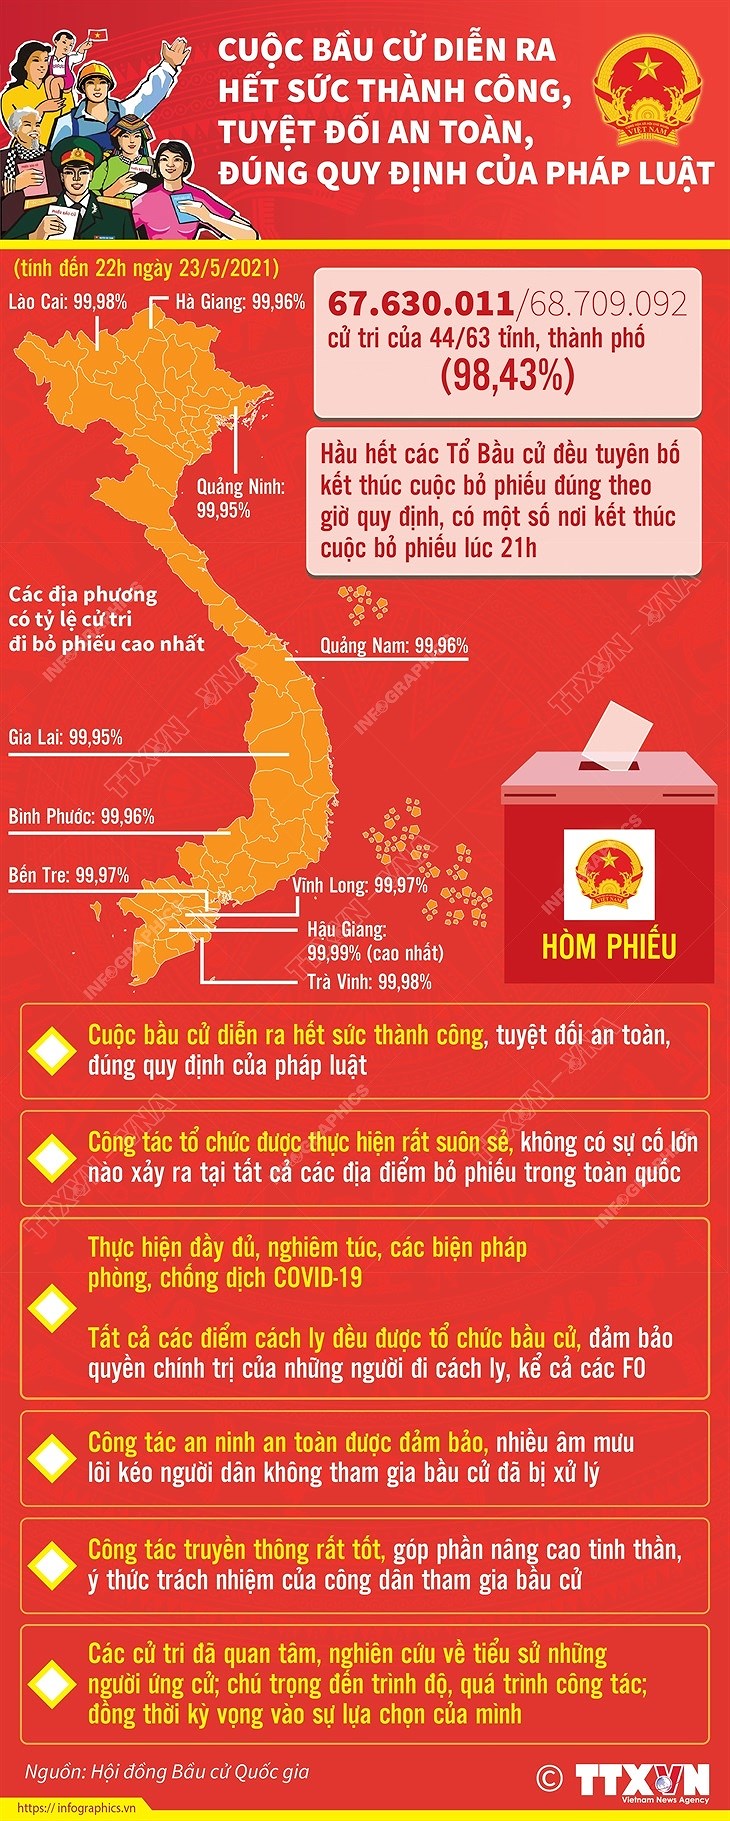 [Infographics] Cuoc bau cu dien ra thanh cong, an toan, dung quy dinh hinh anh 1